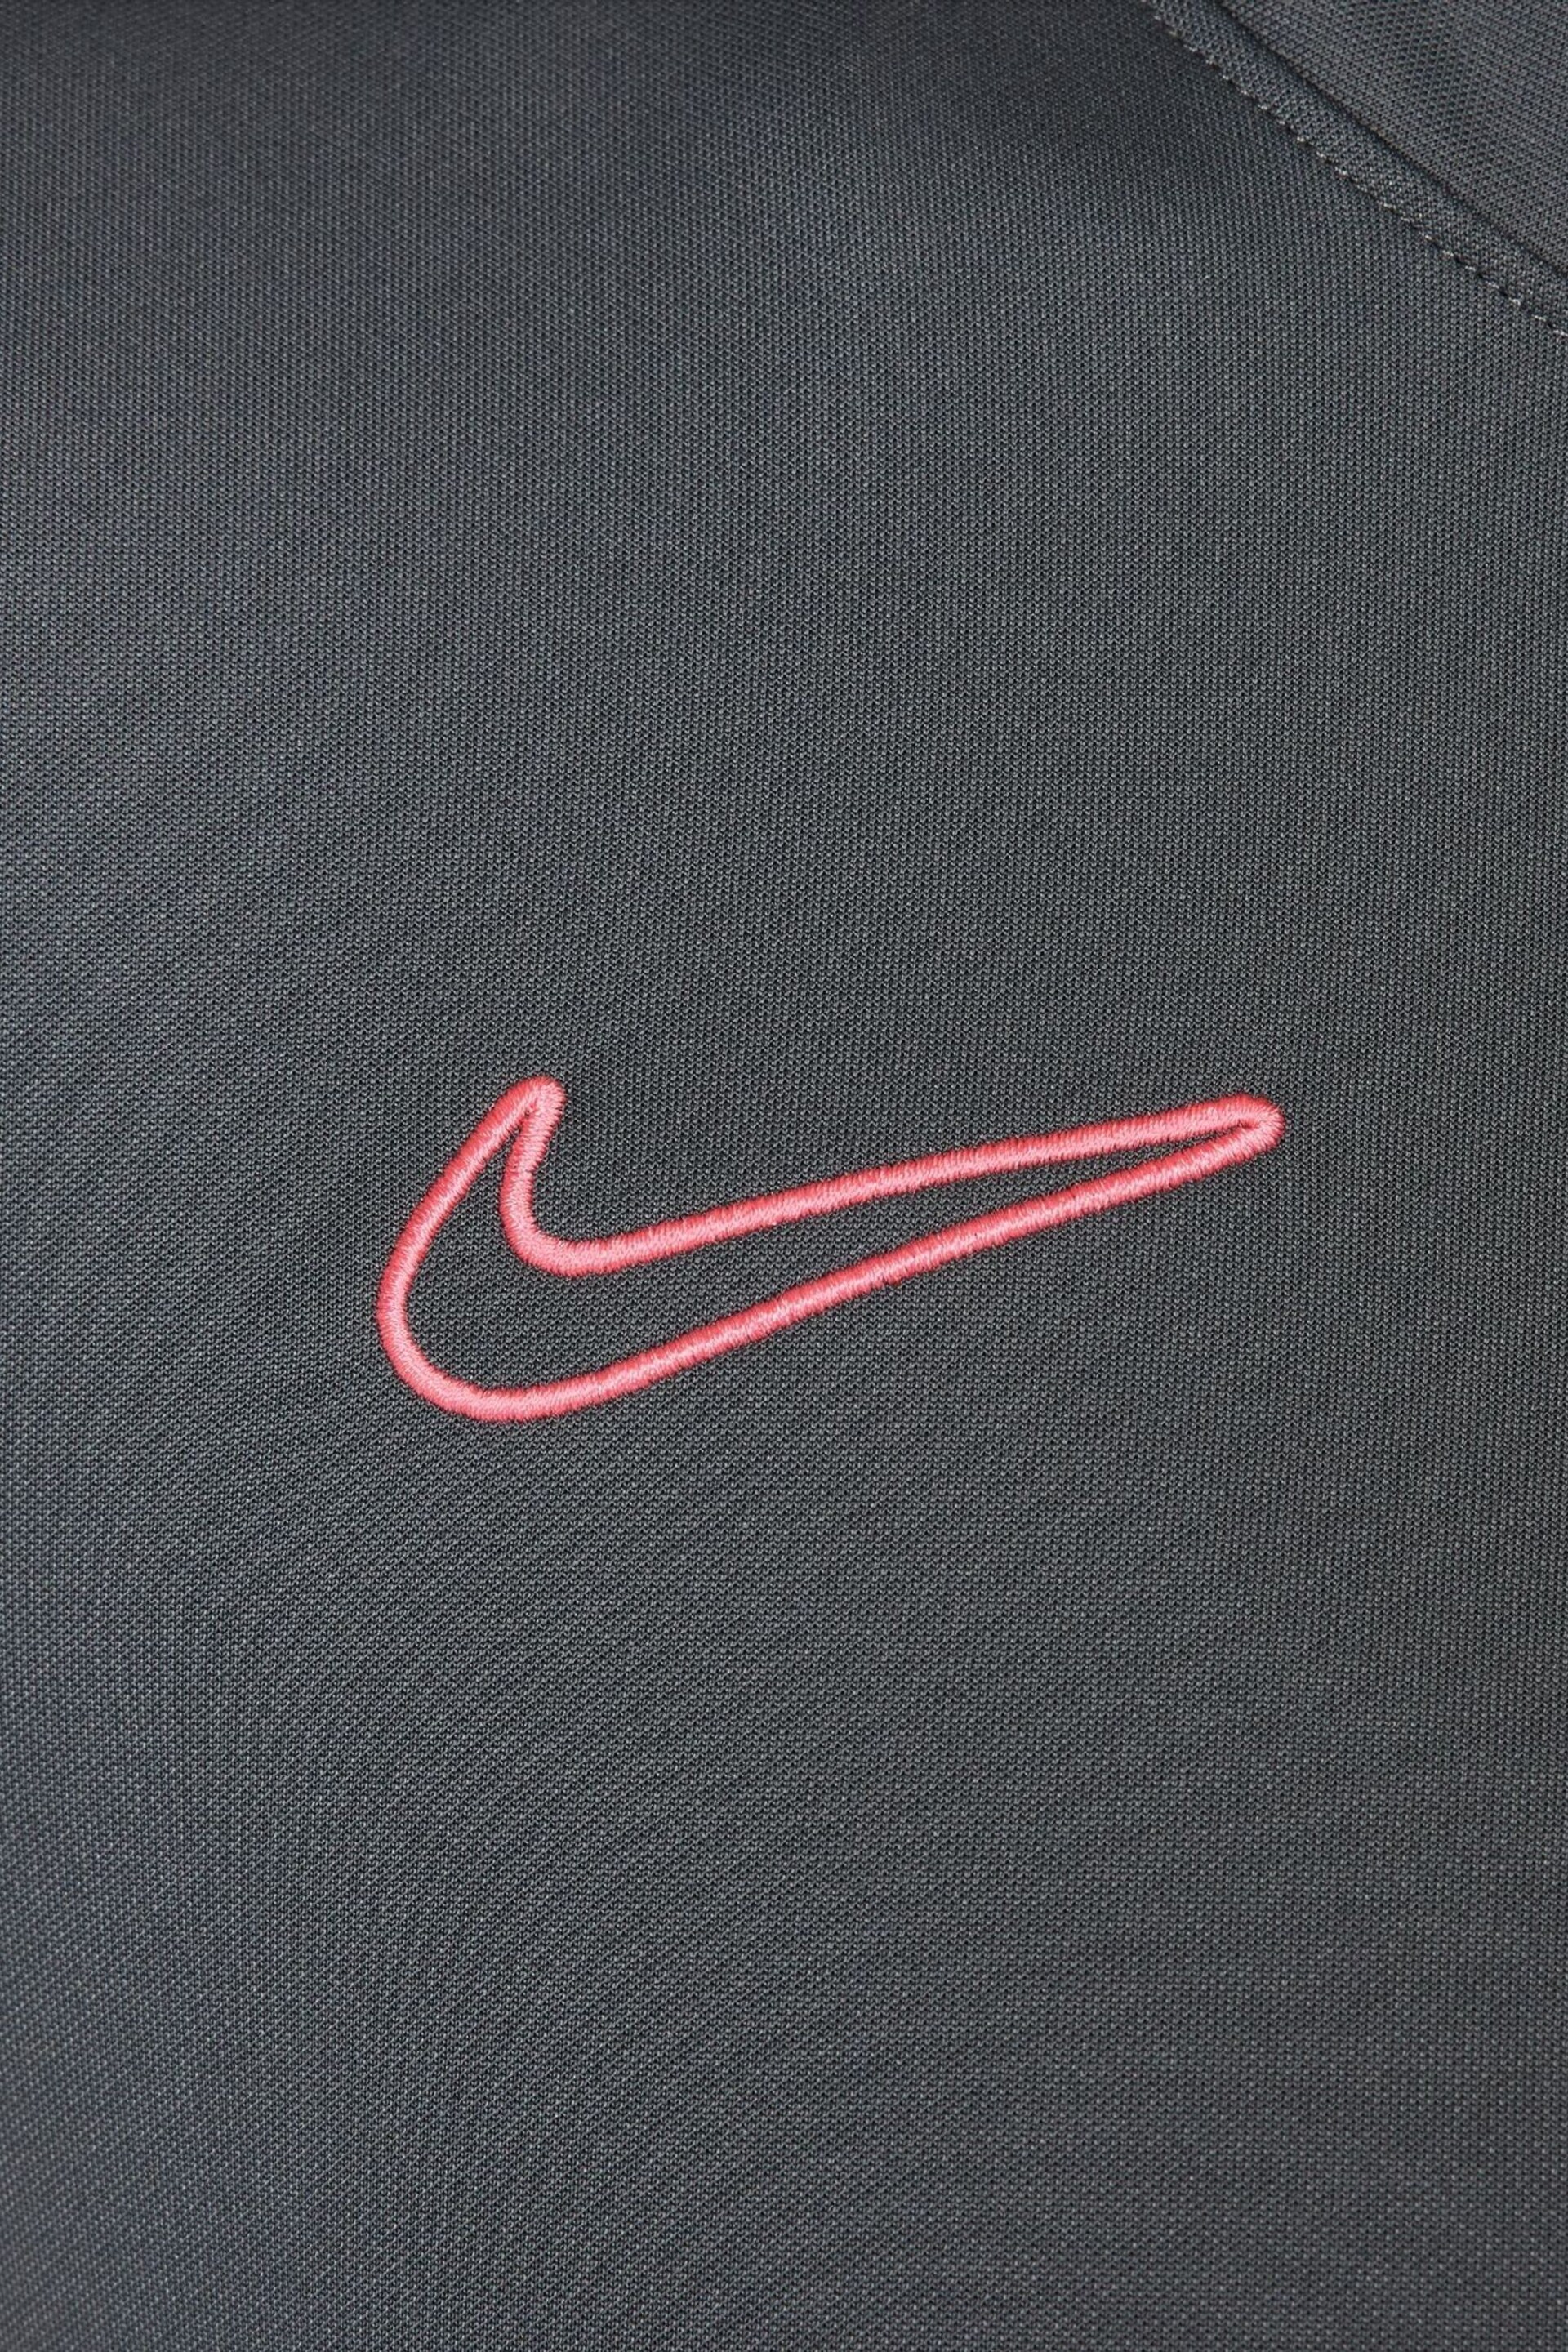 Nike Black Dri-FIT Academy Drill Training Top - Image 8 of 8